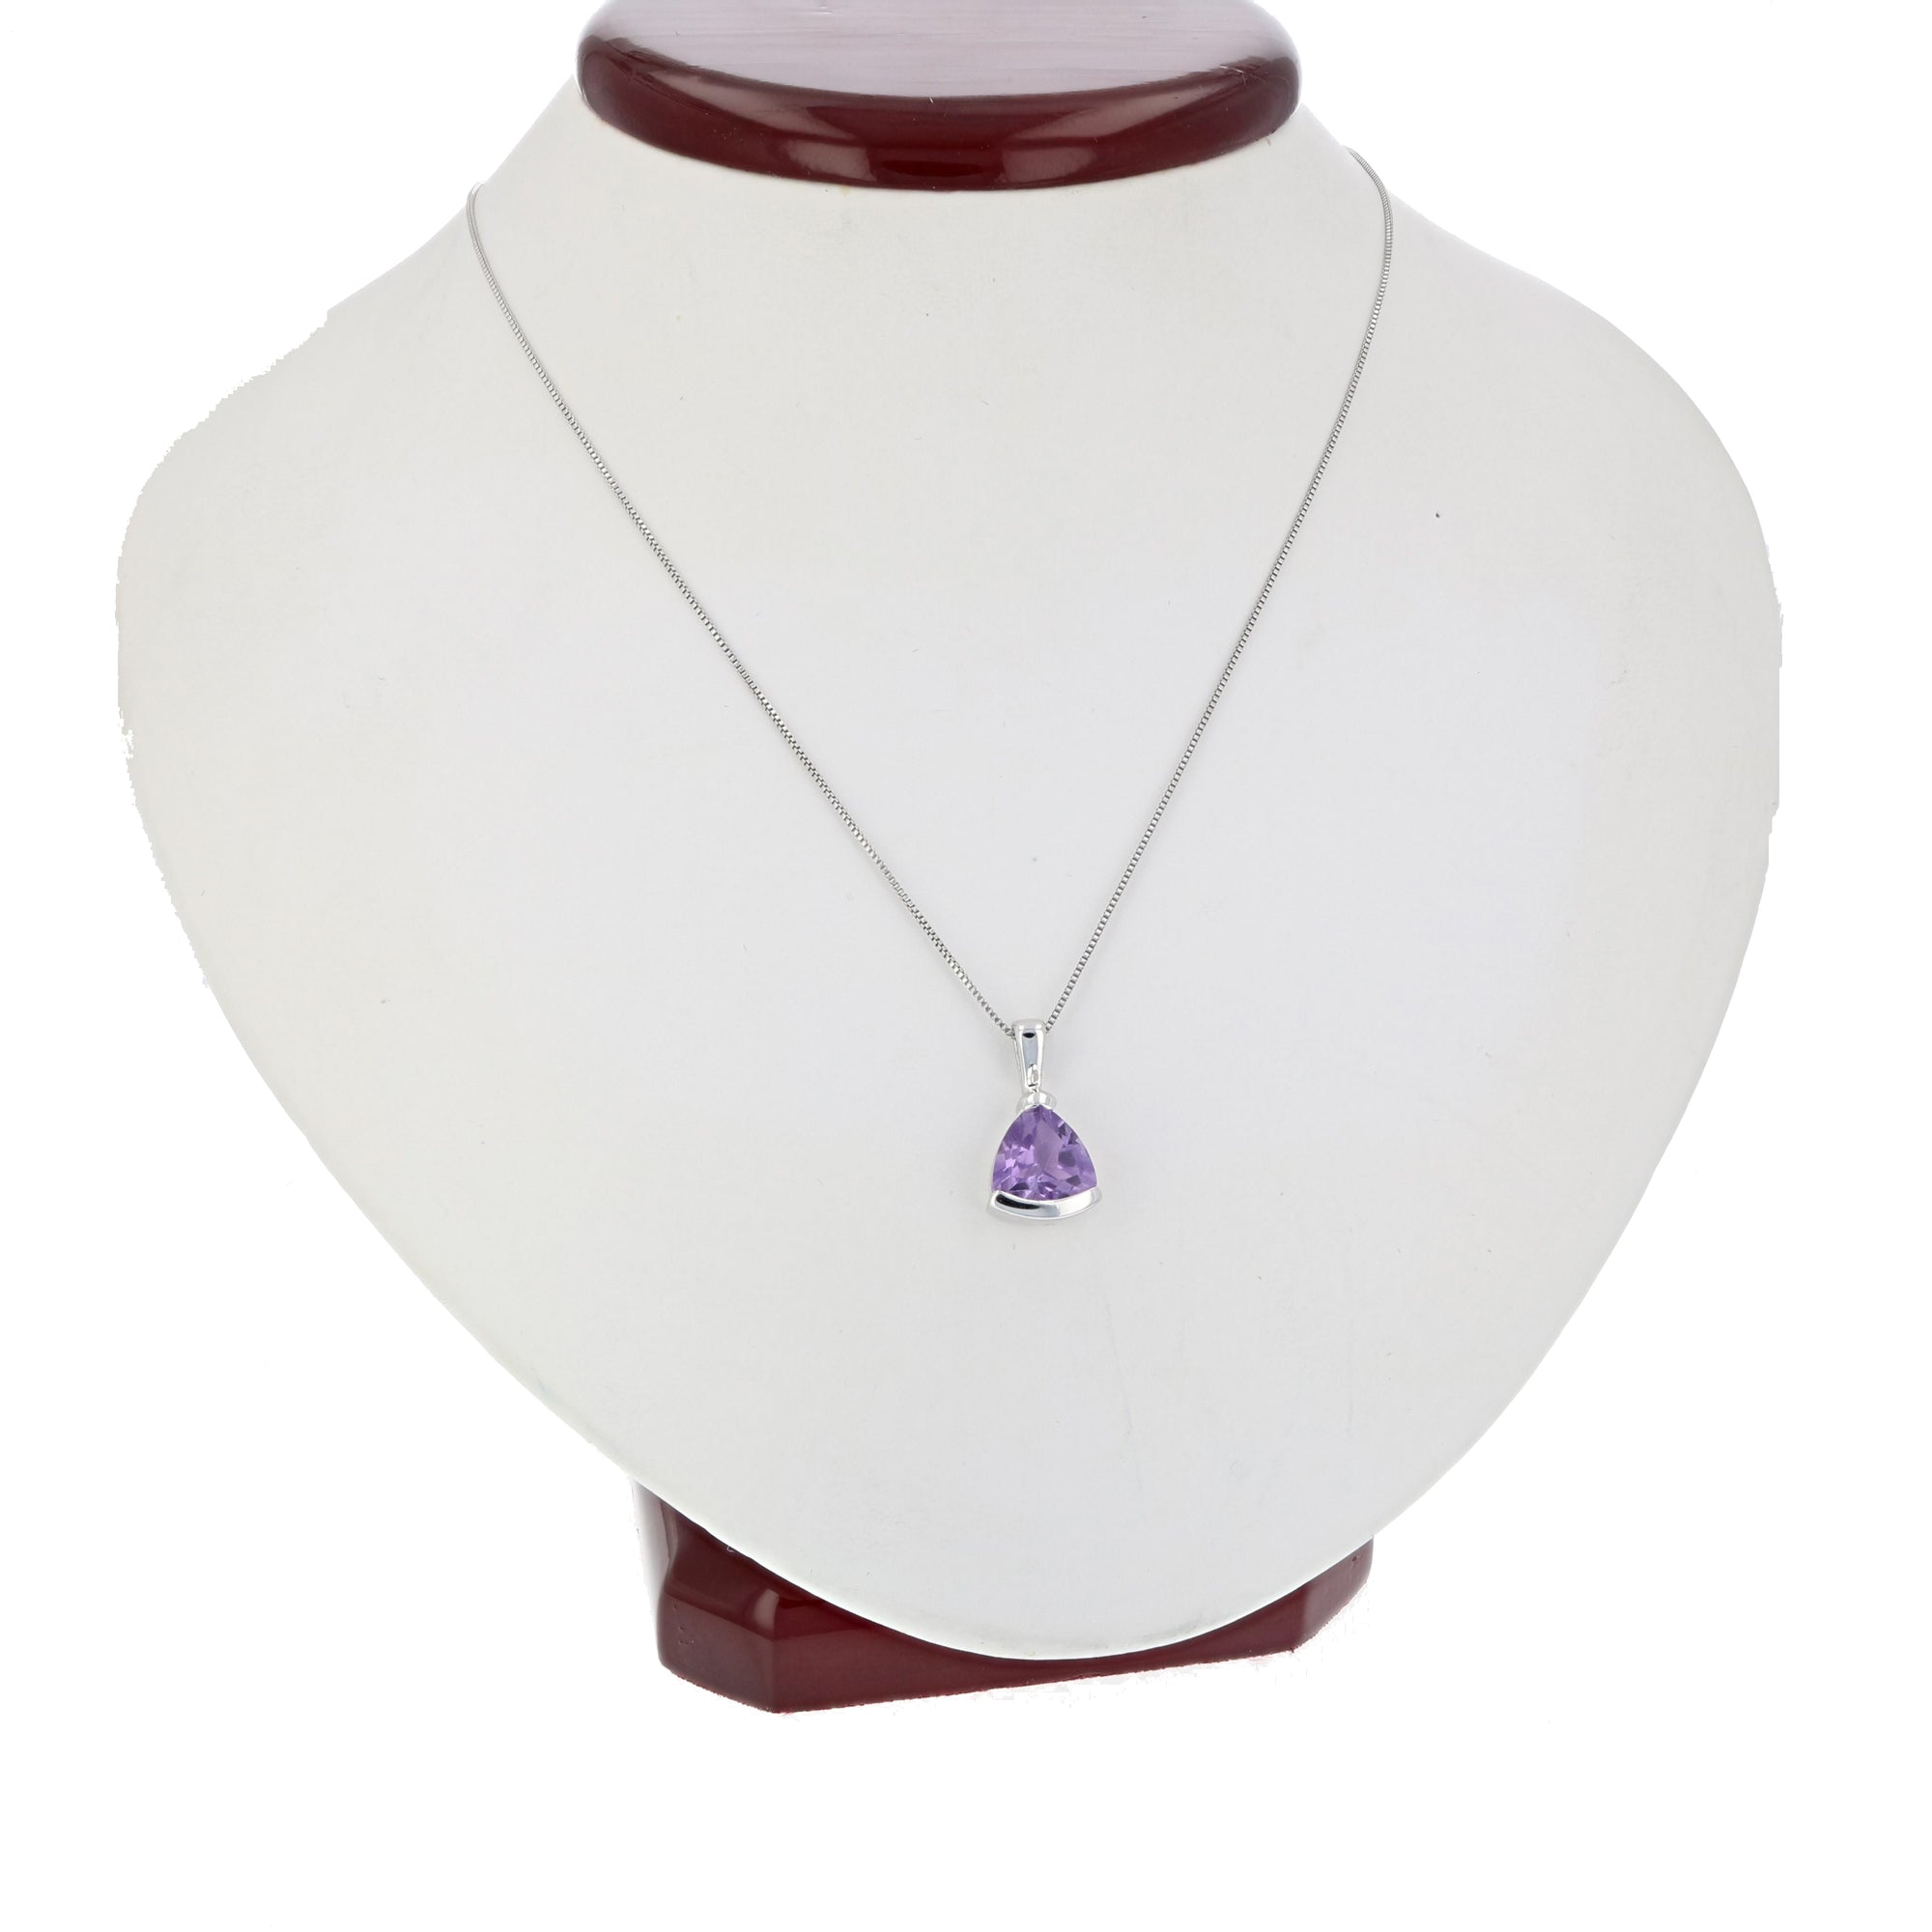 3/4 cttw Pendant Necklace, Purple Amethyst Trillion Pendant Necklace for Women in .925 Sterling Silver with Rhodium, 18 Inch Chain, Channel Setting